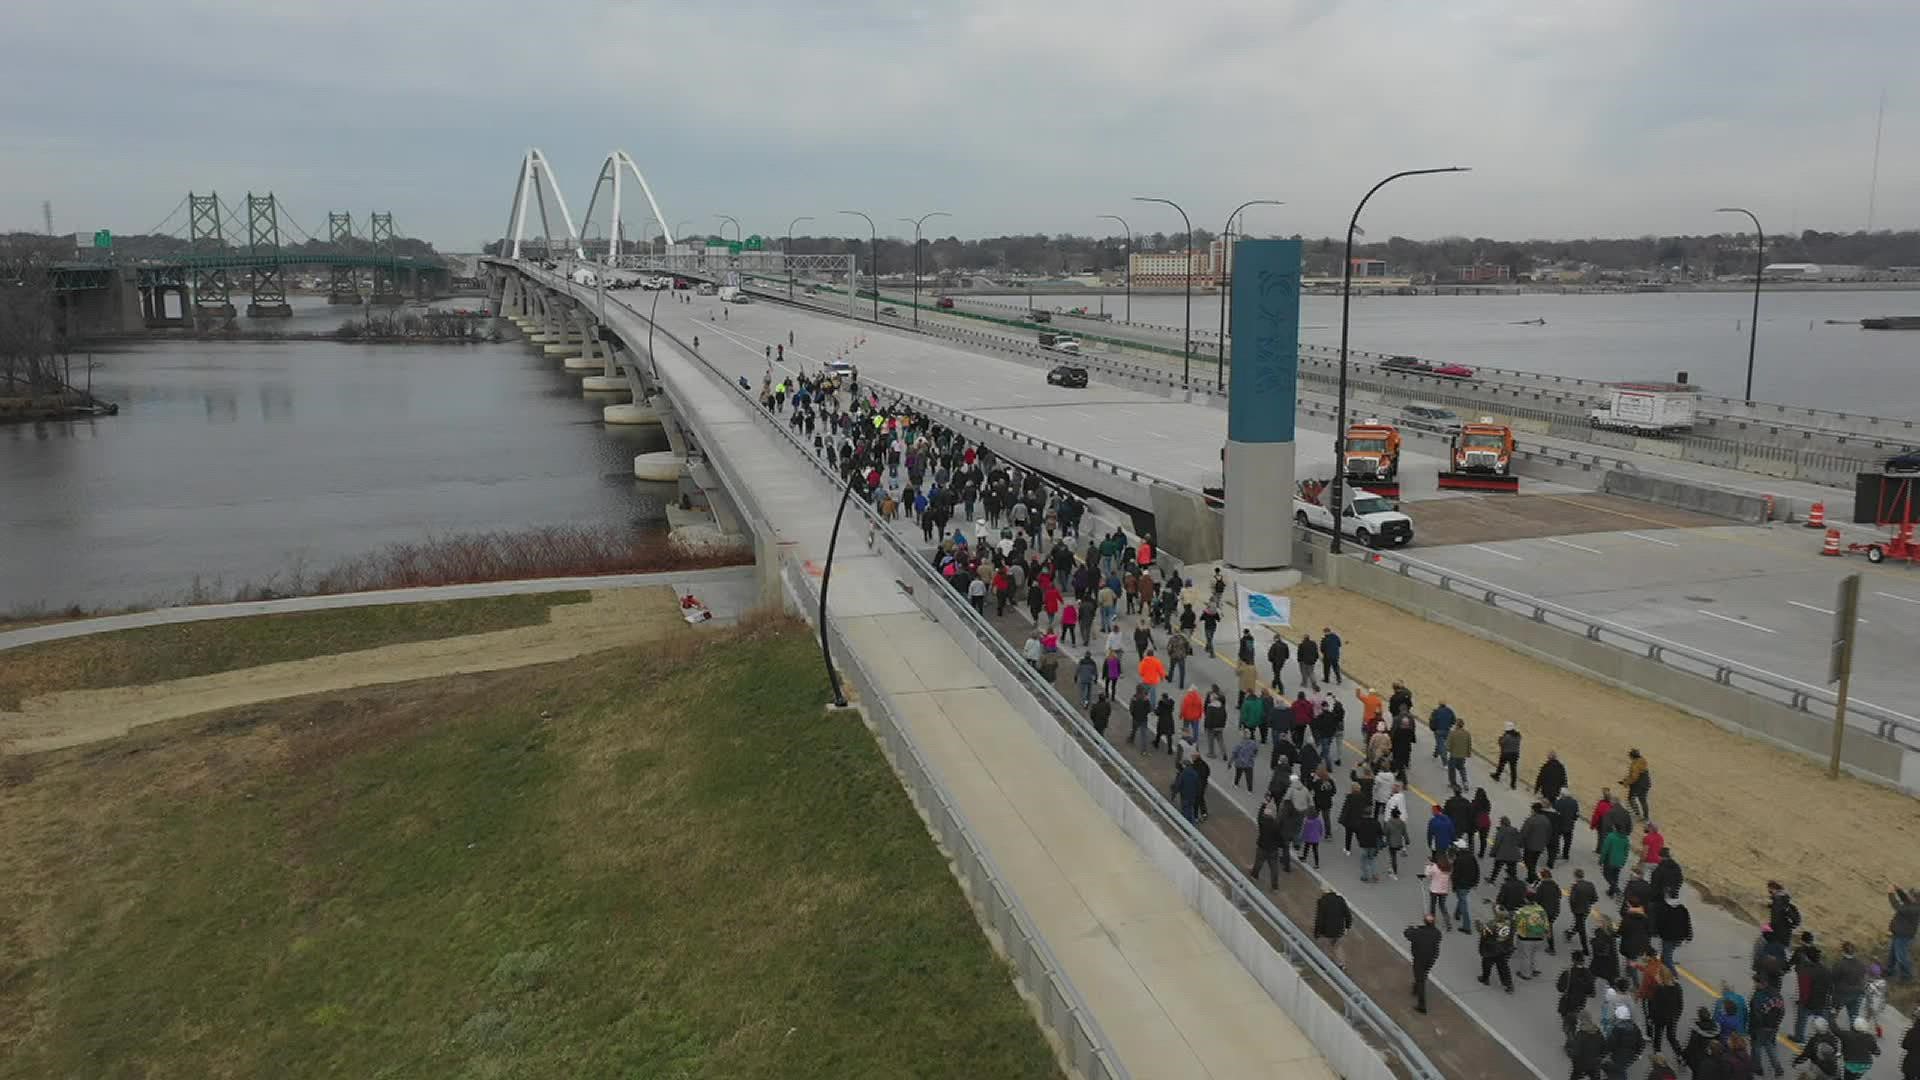 The Illinois-bound bridge span was open for people to walk on it before the bridge is opened to vehicle traffic.